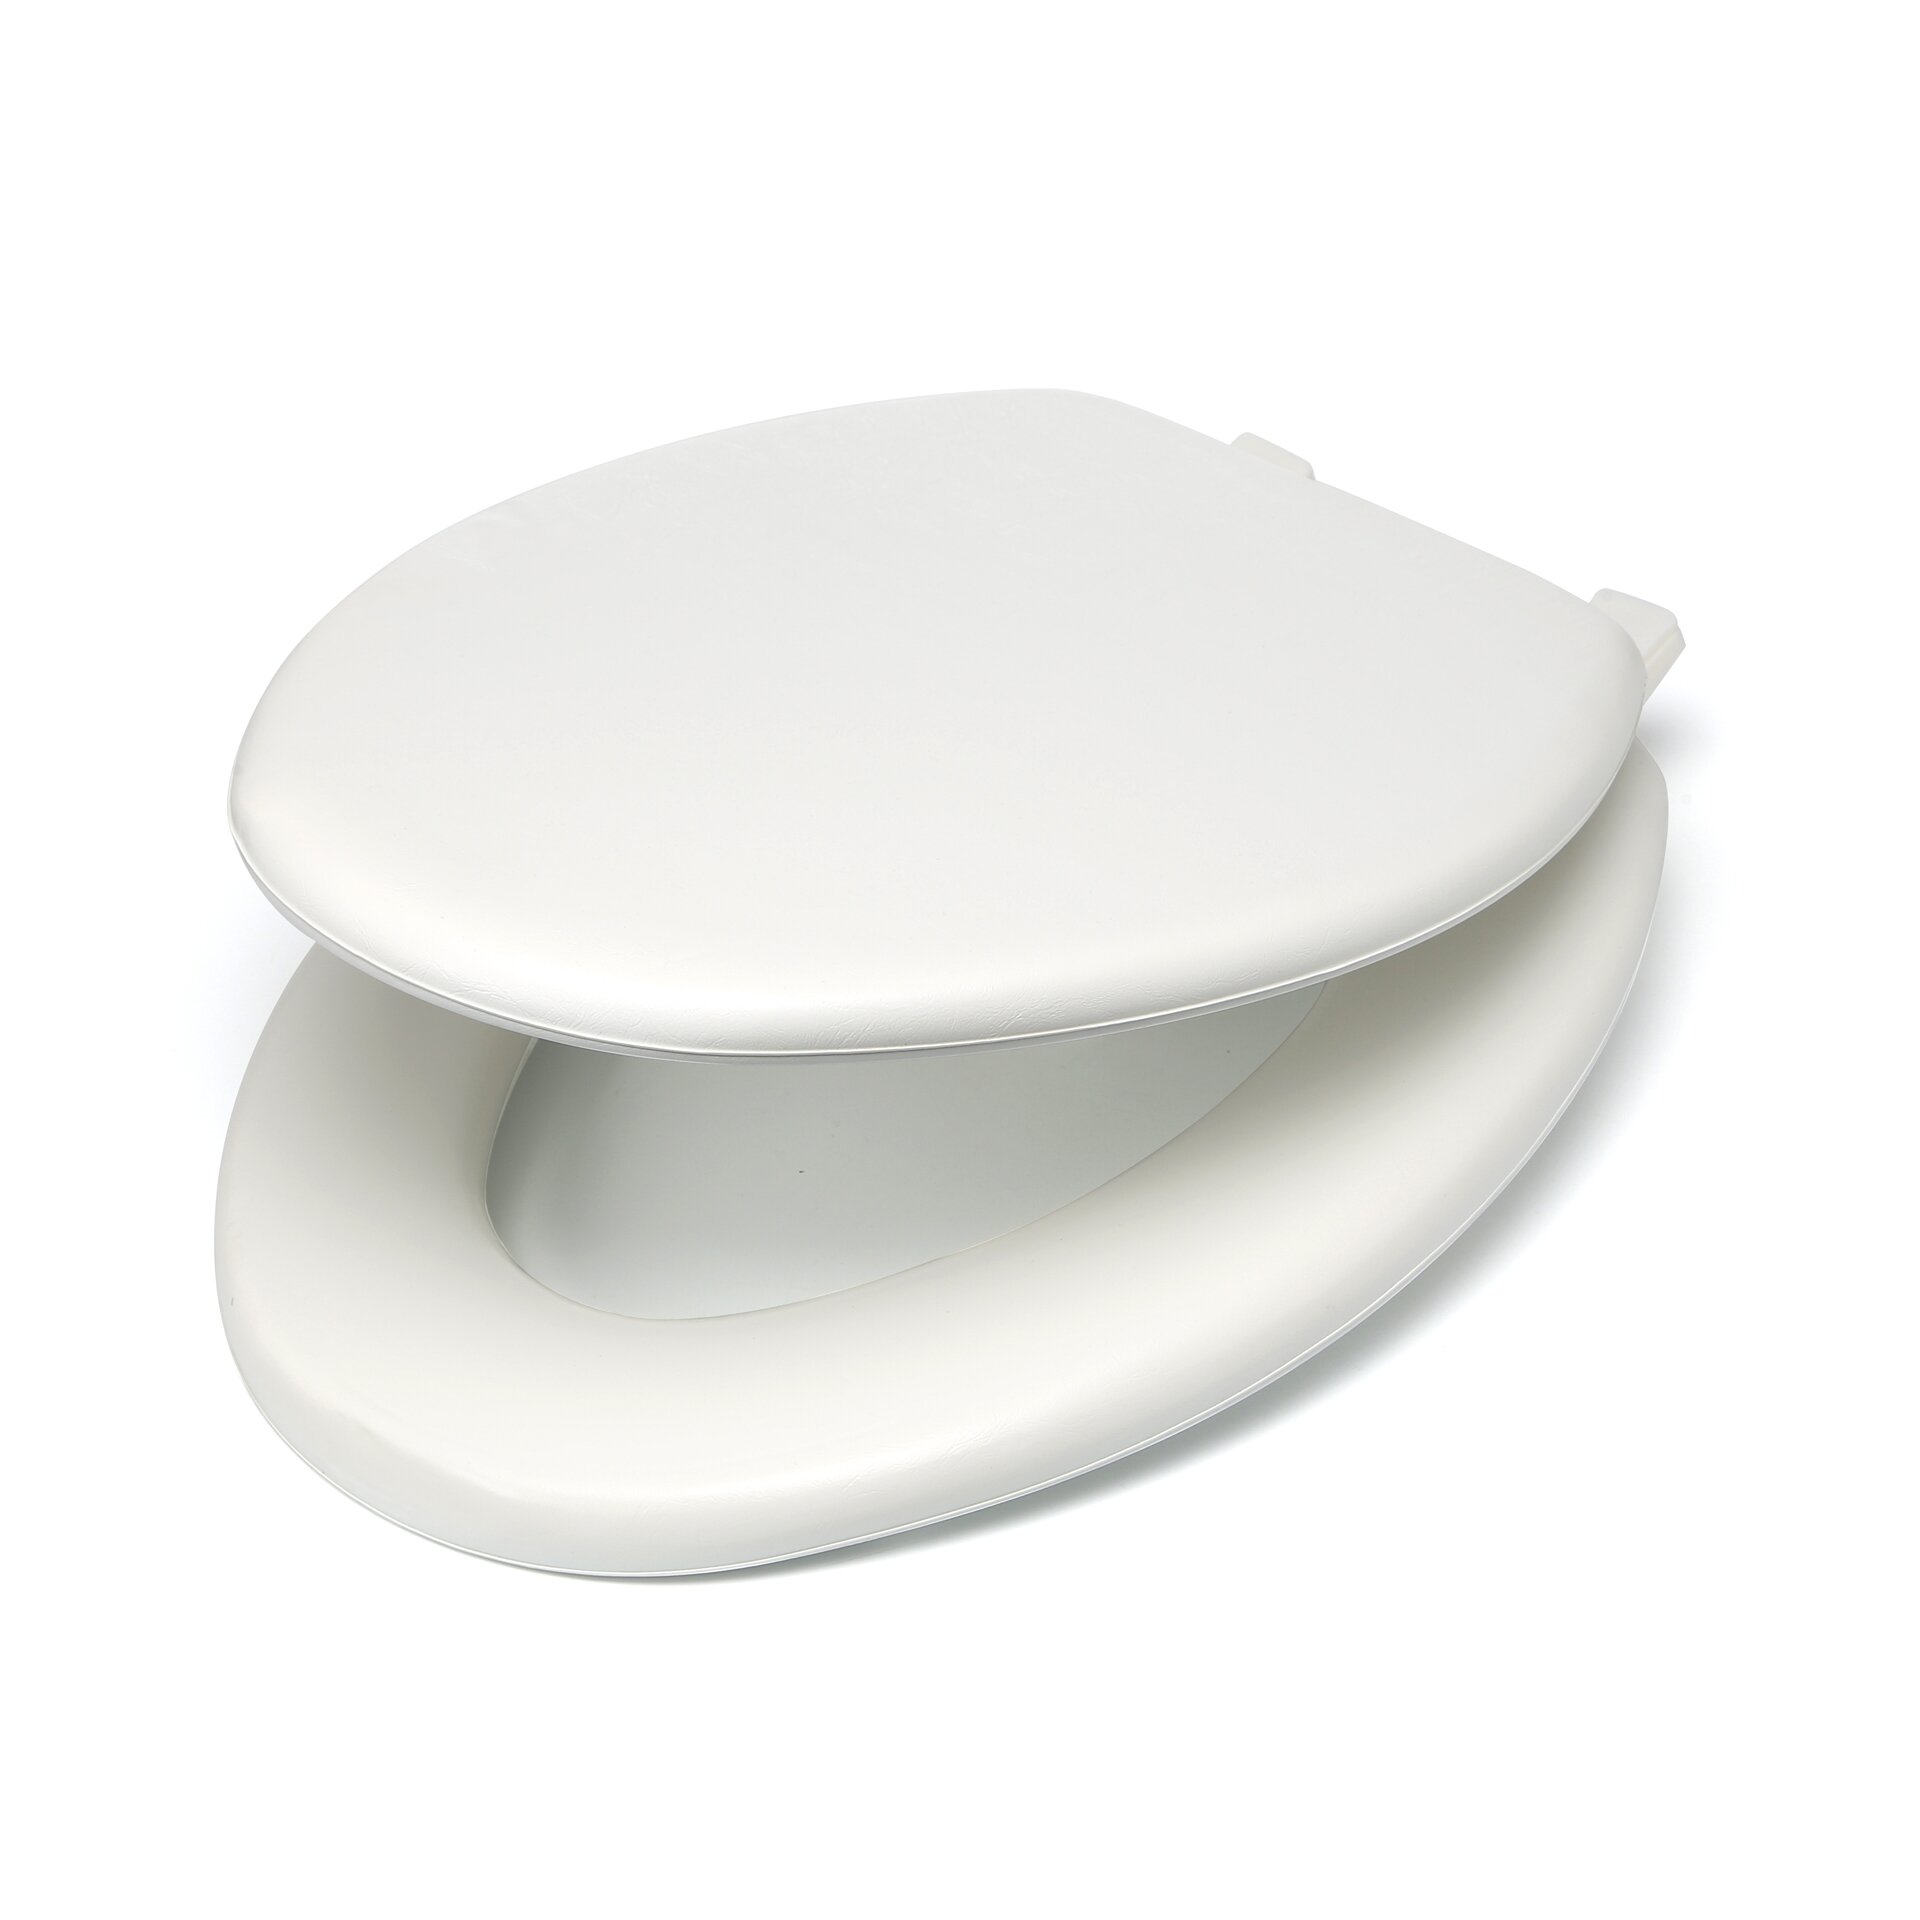 Achim Importing Co Fantasia Soft Elongated Toilet Seat And Reviews Wayfair